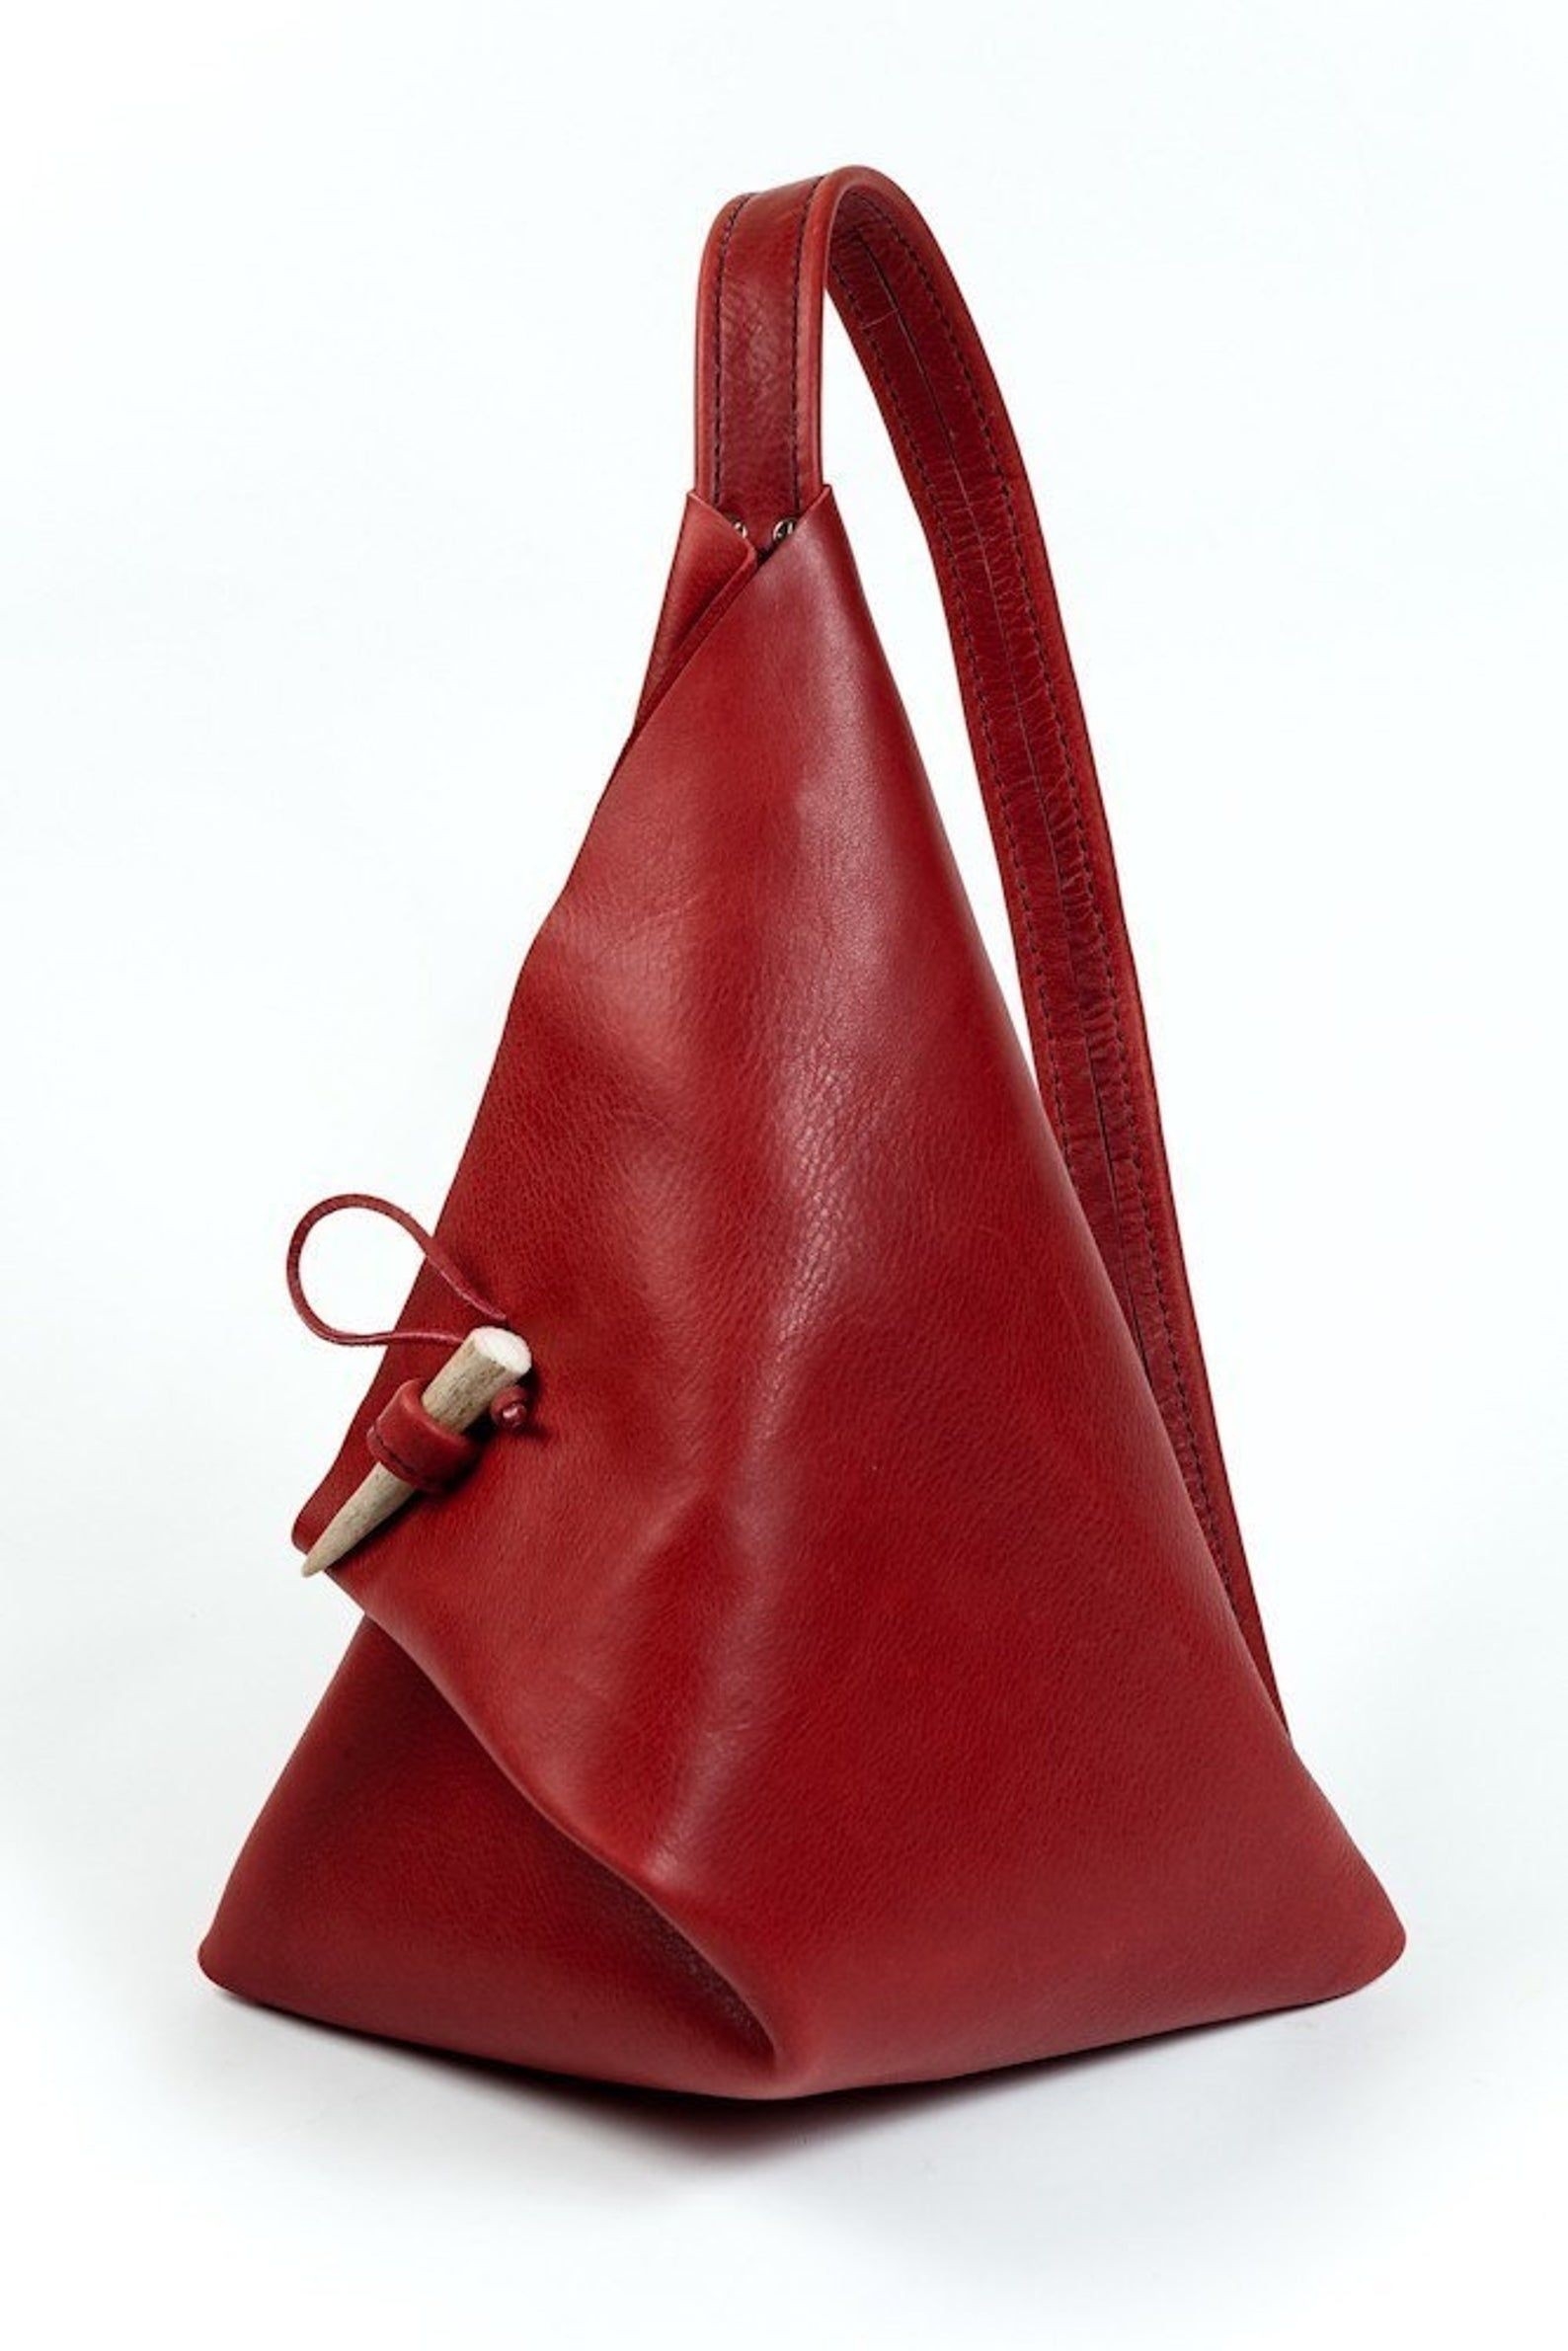 select I was surprised shear Leather Sling Bags - Ideas on Foter